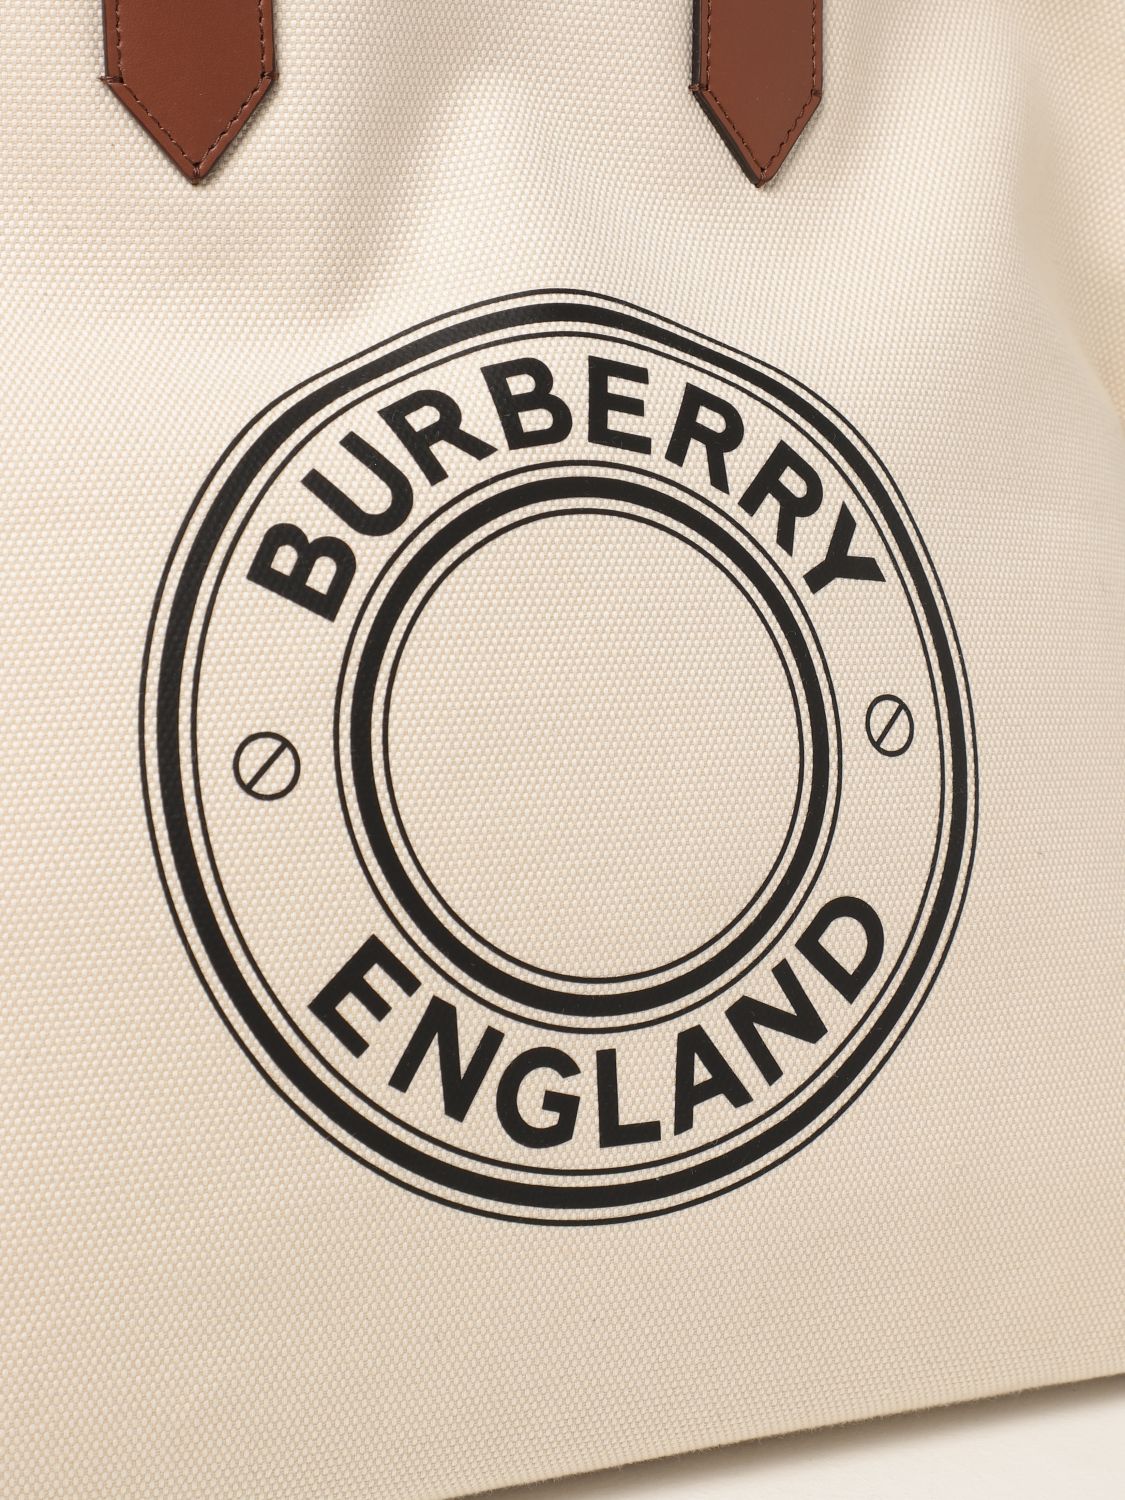 BURBERRY: Large Society Tote Bag in cotton canvas with graphic and logo ...